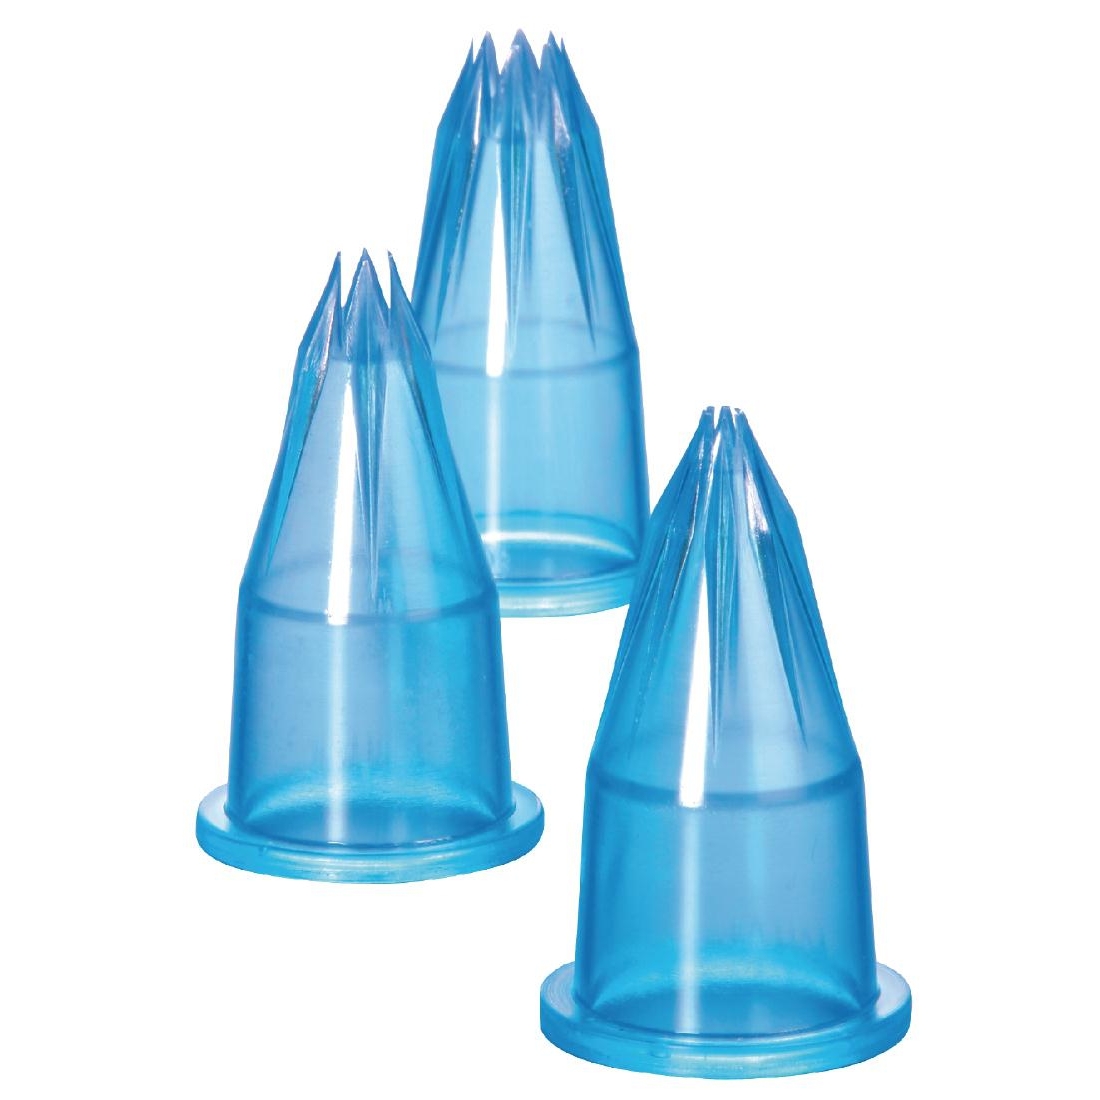 Savoy Piping Tube Tip Nozzle Made of Polycarbonate Plain 12mm 1.2cm 